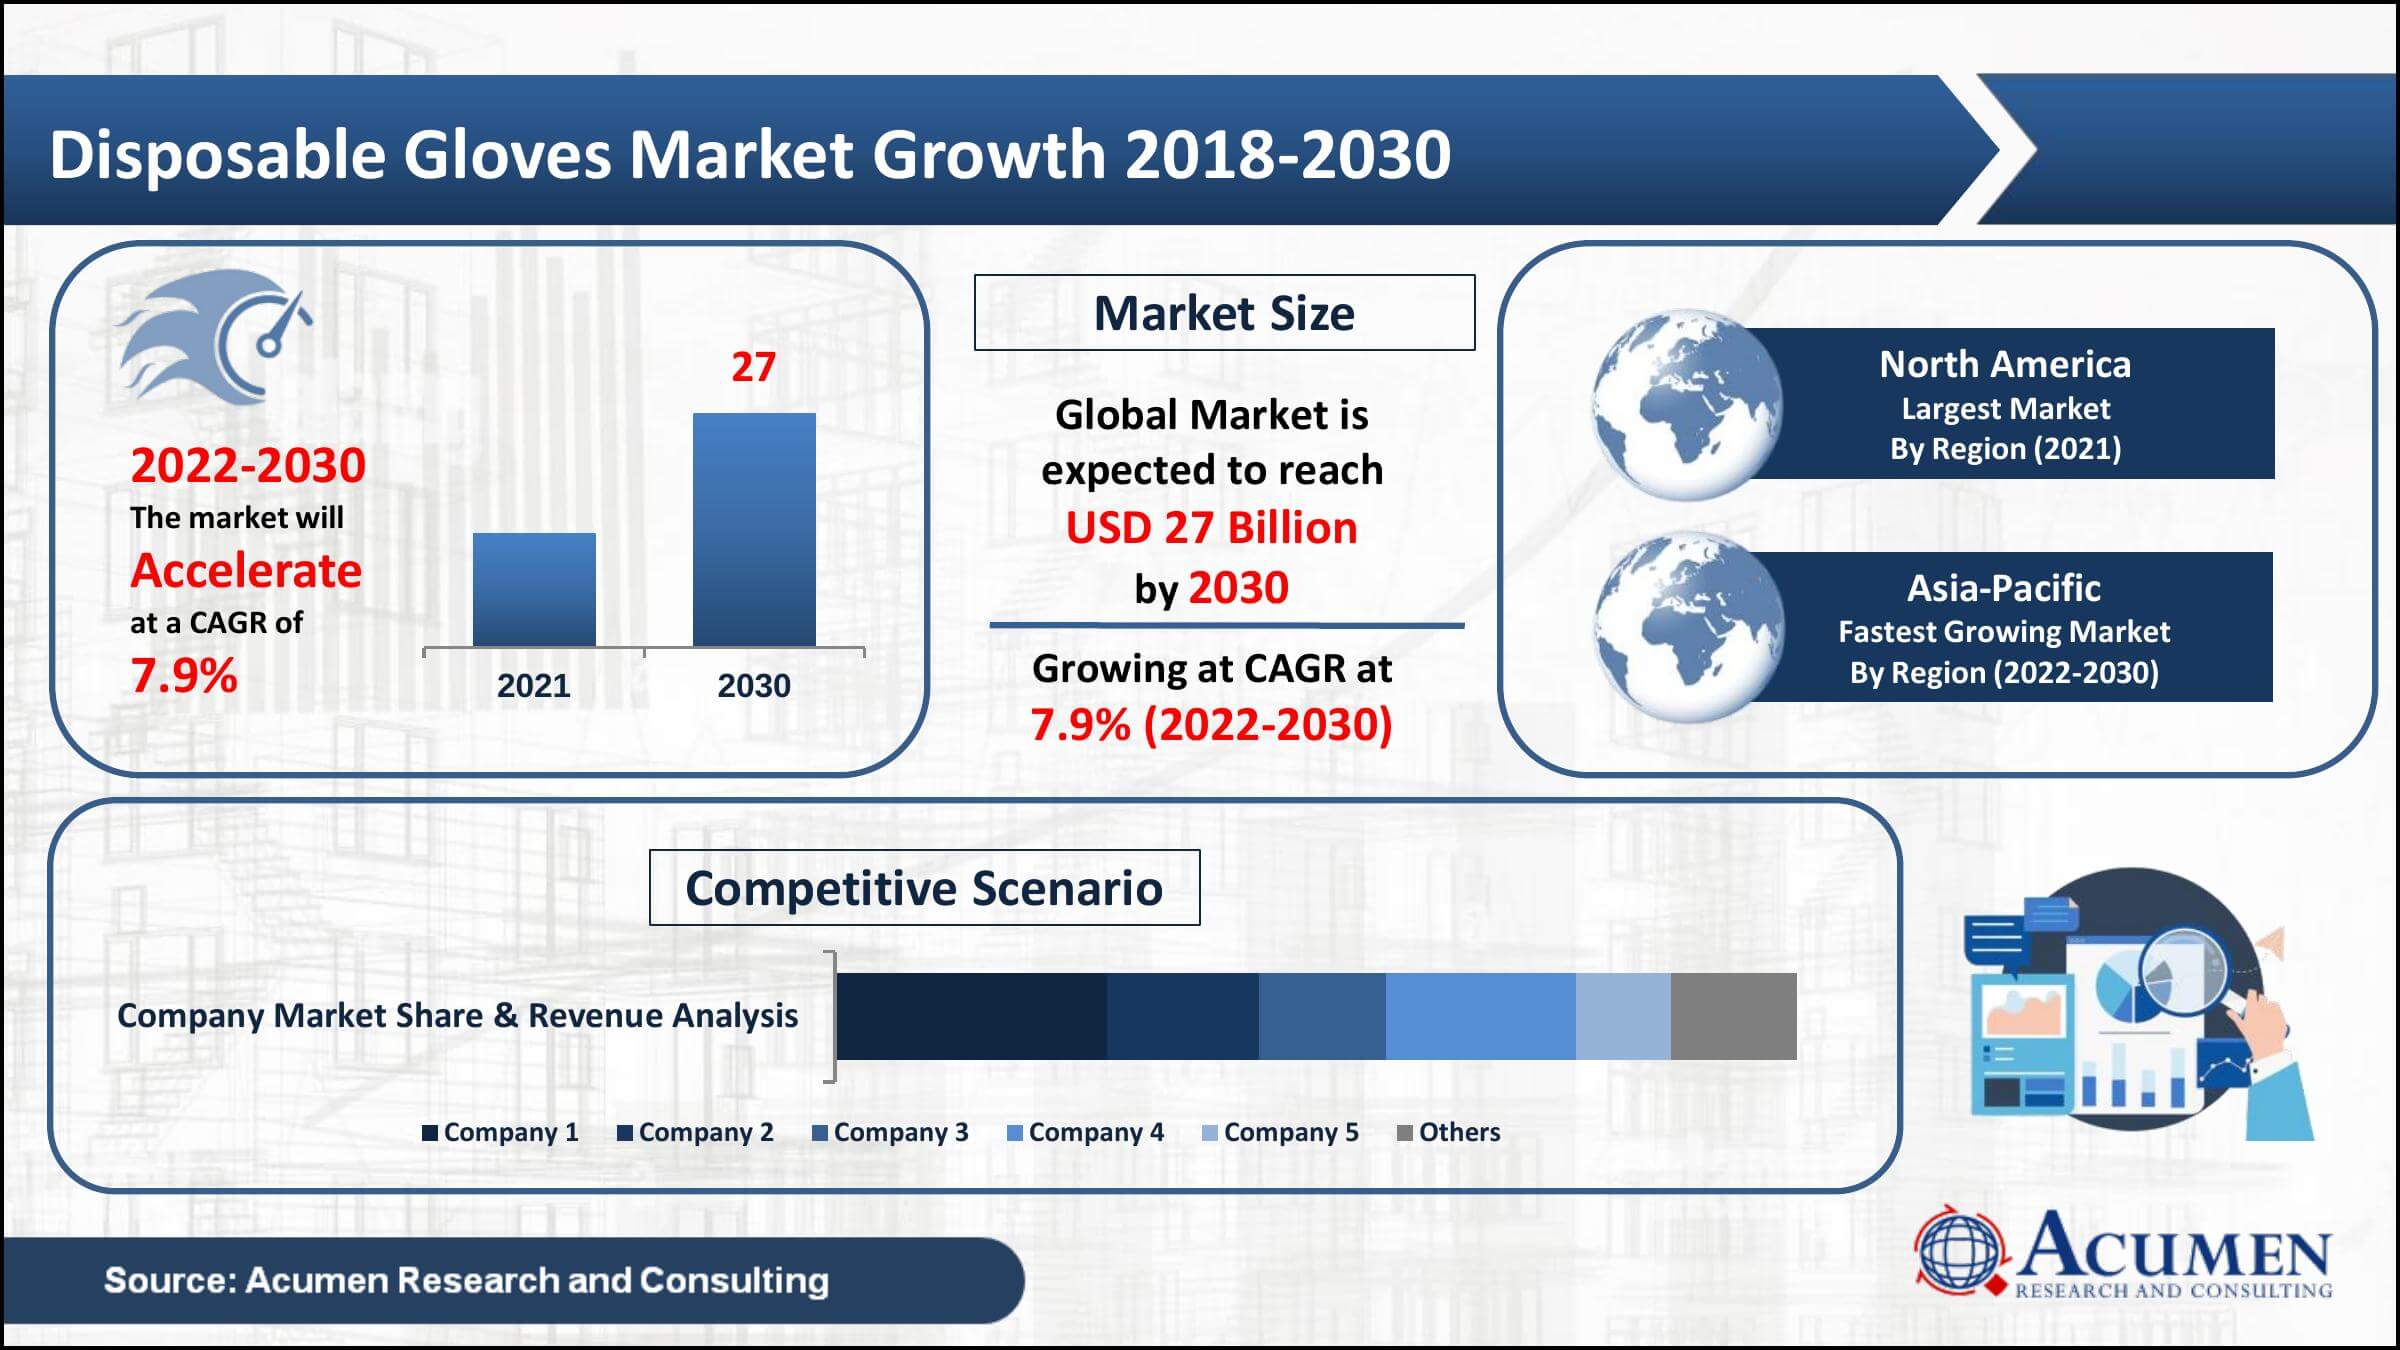 Global disposable gloves market revenue collected USD 13.6 Billion in 2021, with a 7.9% CAGR between 2022 and 2030